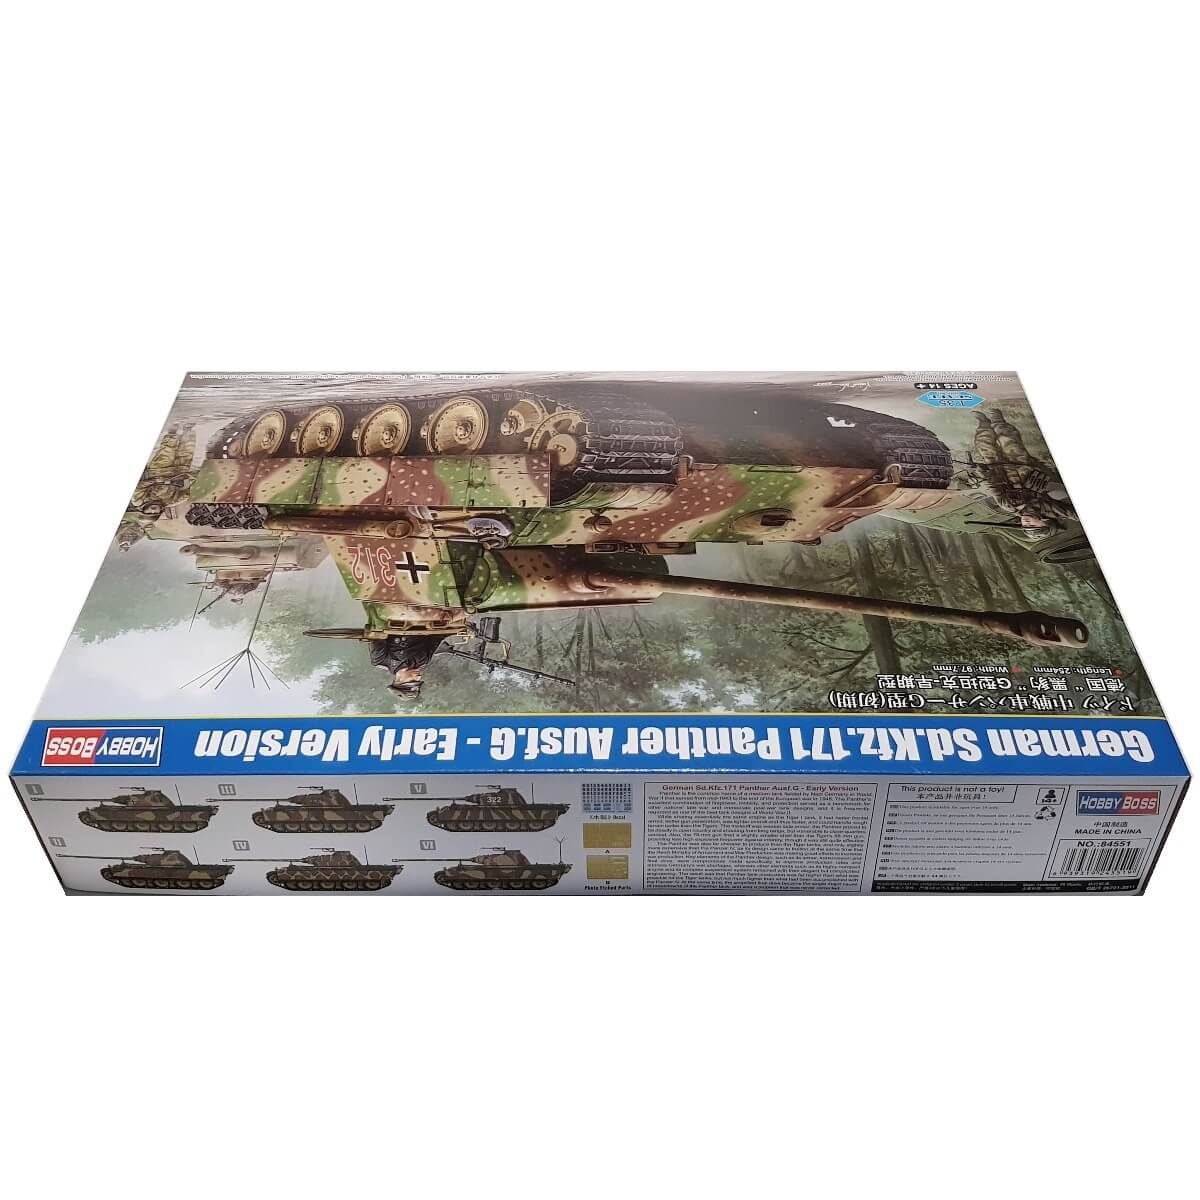 1:35 German Sd.Kfz. 171 Panther Ausf. G - Early Version - HOBBY BOSS